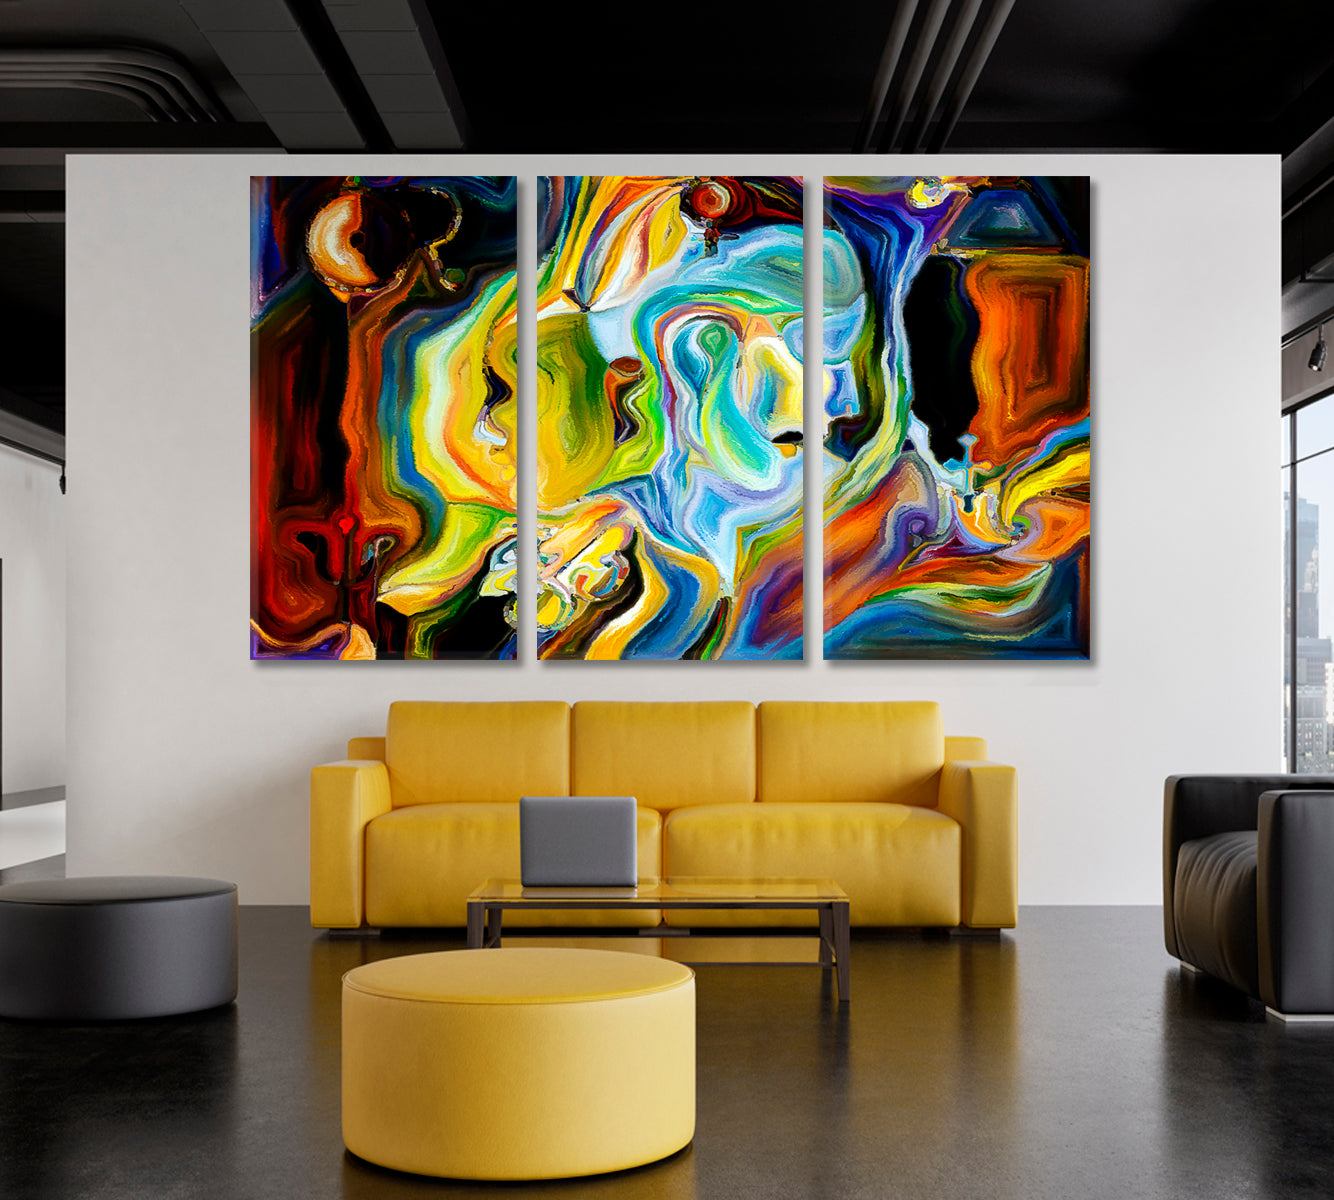 Behind Consciousness. Surreal World Of Colors And Curves Contemporary Art Artesty 3 panels 36" x 24" 